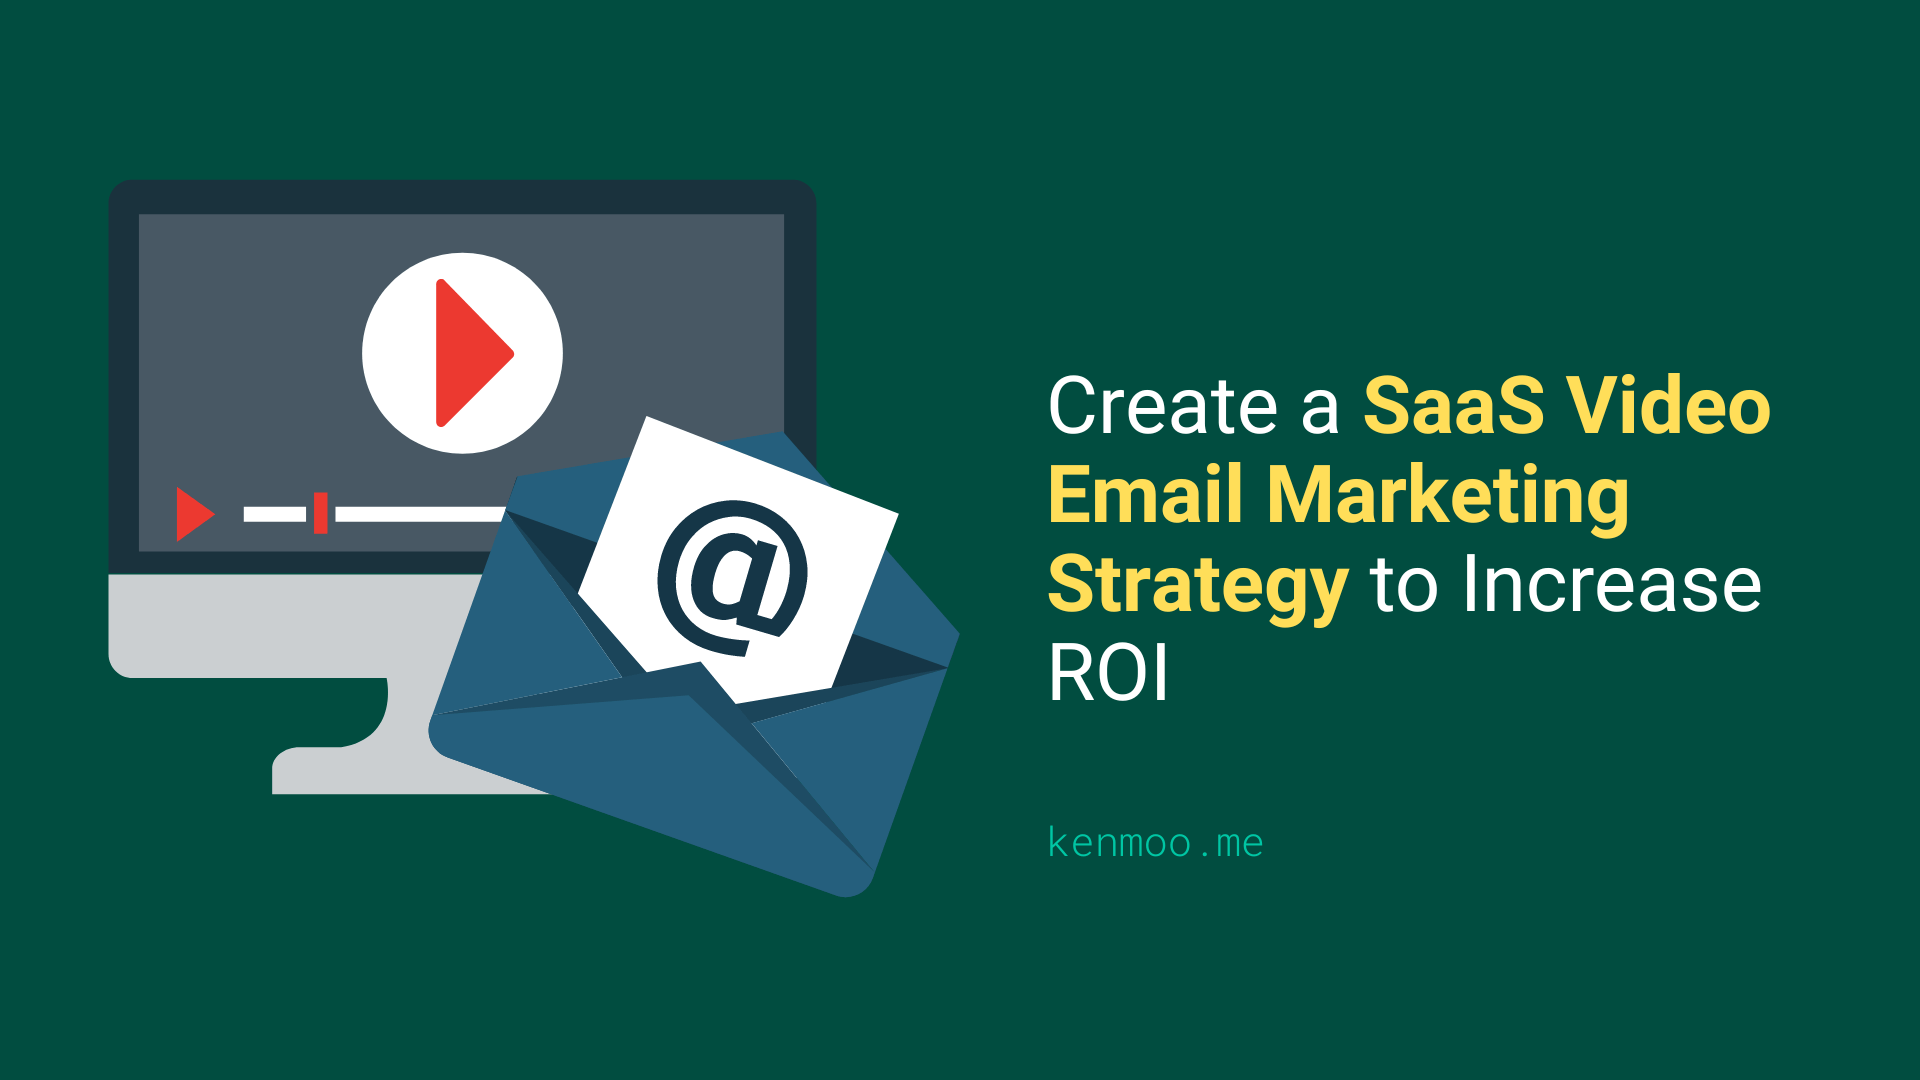 Create a SaaS Video Email Marketing Strategy to Increase ROI